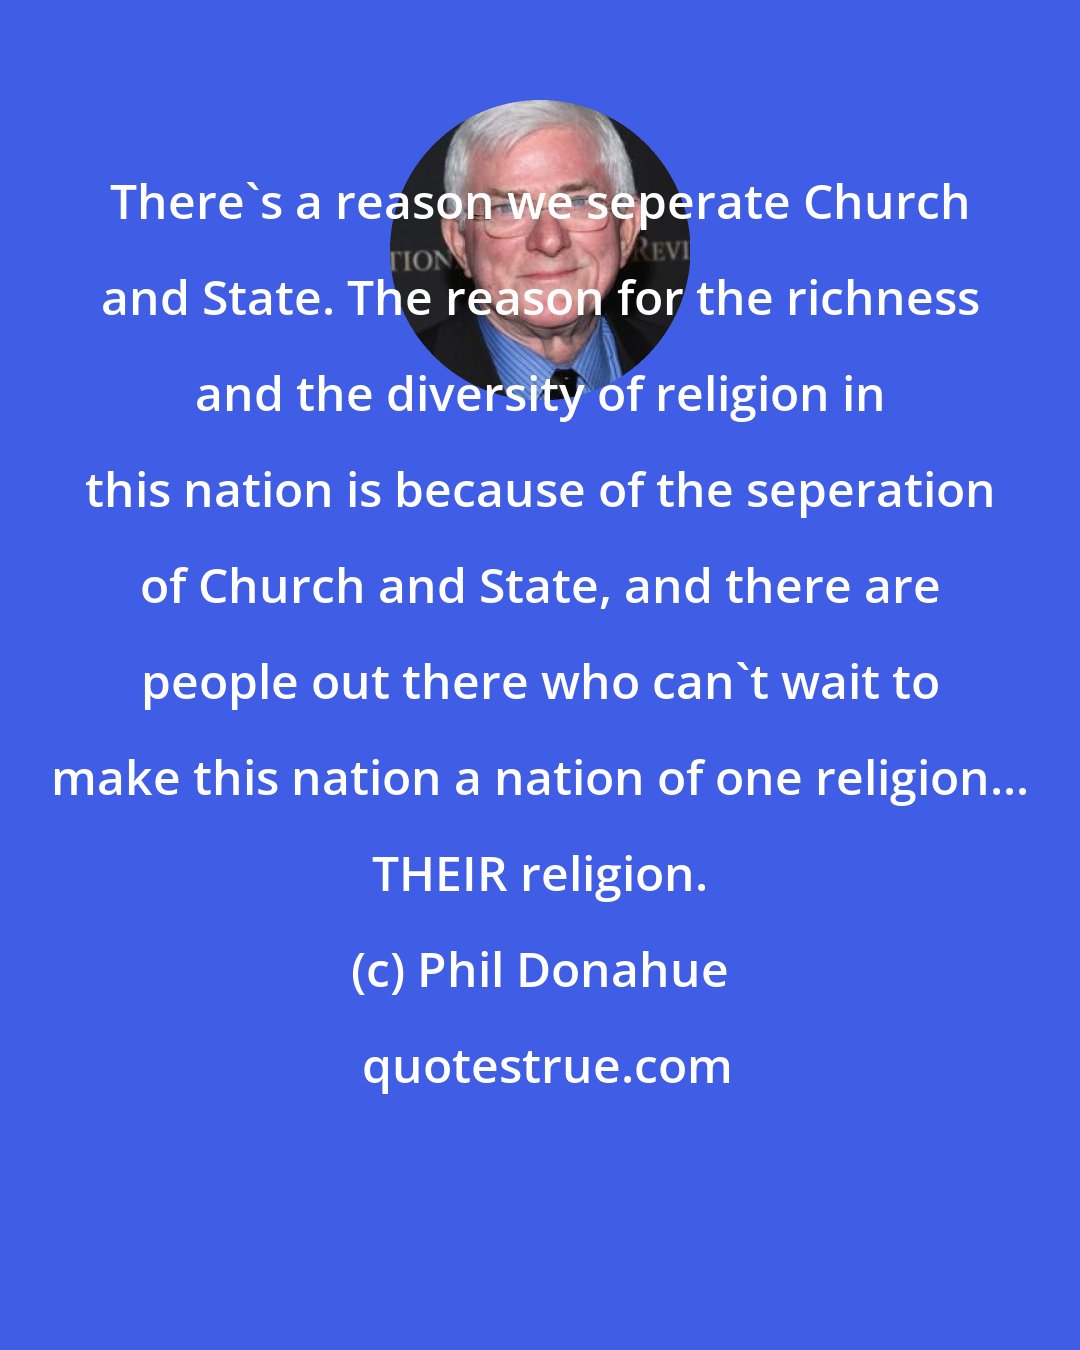 Phil Donahue: There's a reason we seperate Church and State. The reason for the richness and the diversity of religion in this nation is because of the seperation of Church and State, and there are people out there who can't wait to make this nation a nation of one religion... THEIR religion.